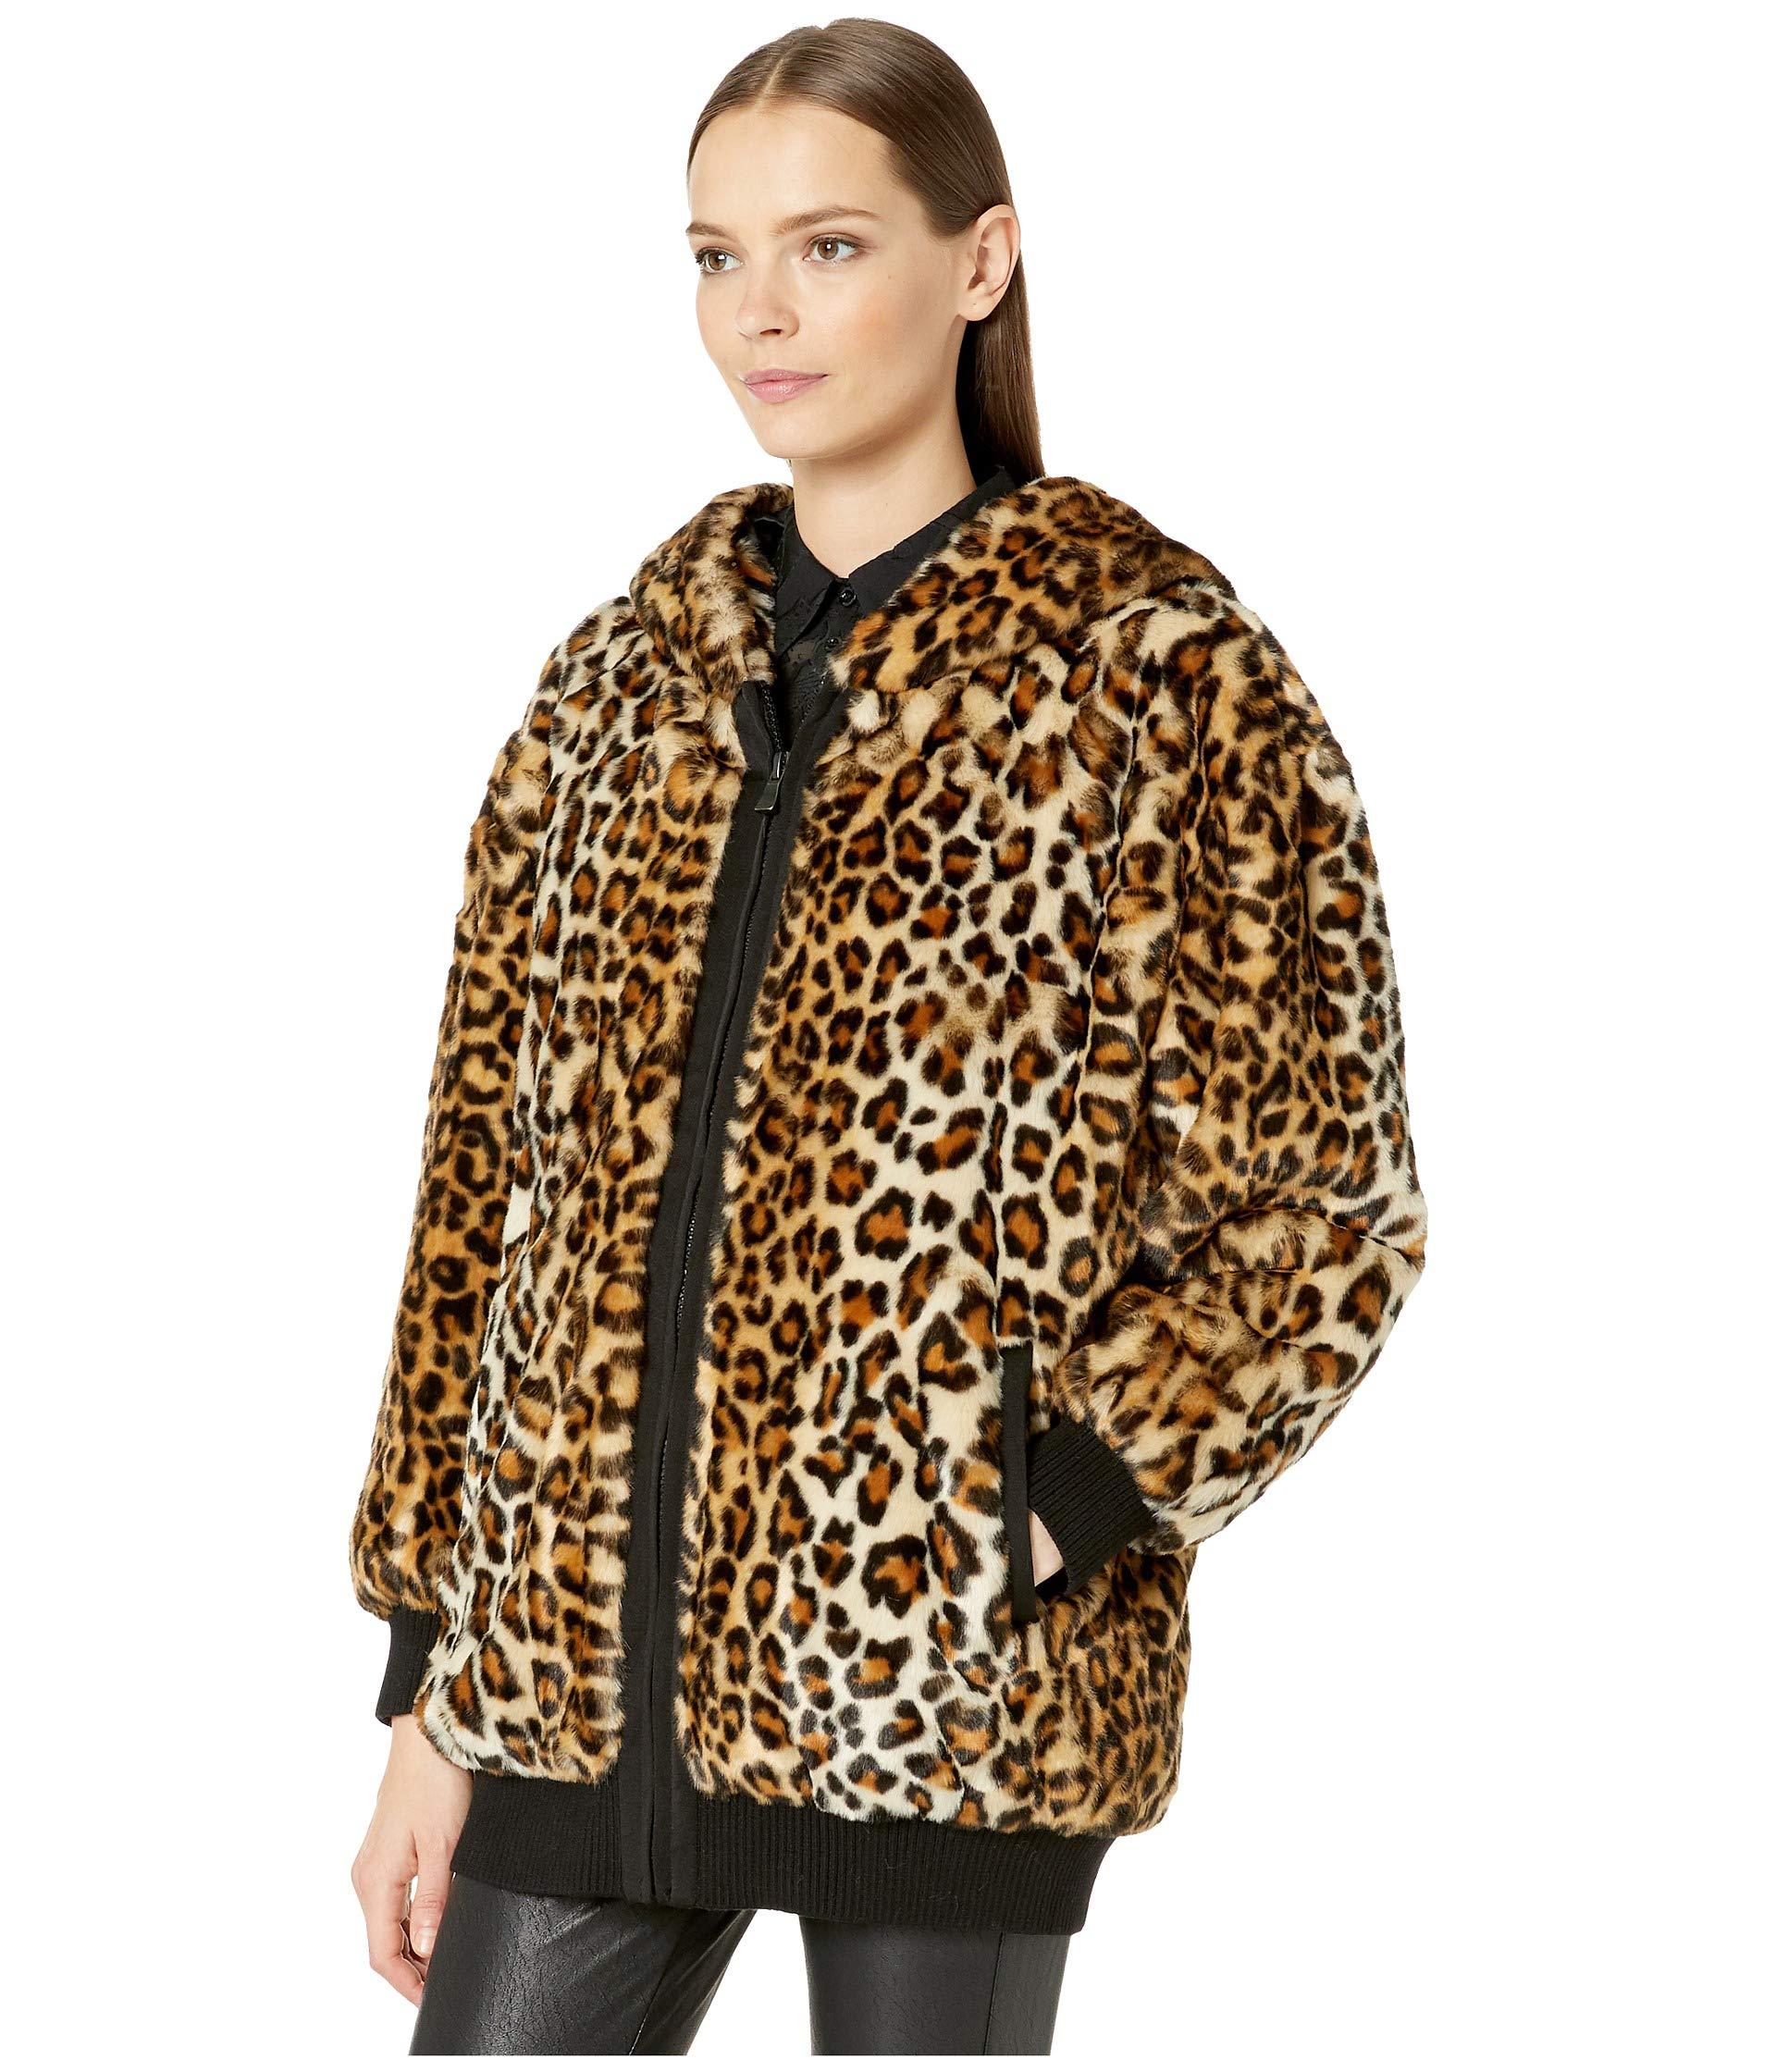 Boutique Moschino Faux Fur Leopard Jacket in Brown - Lyst